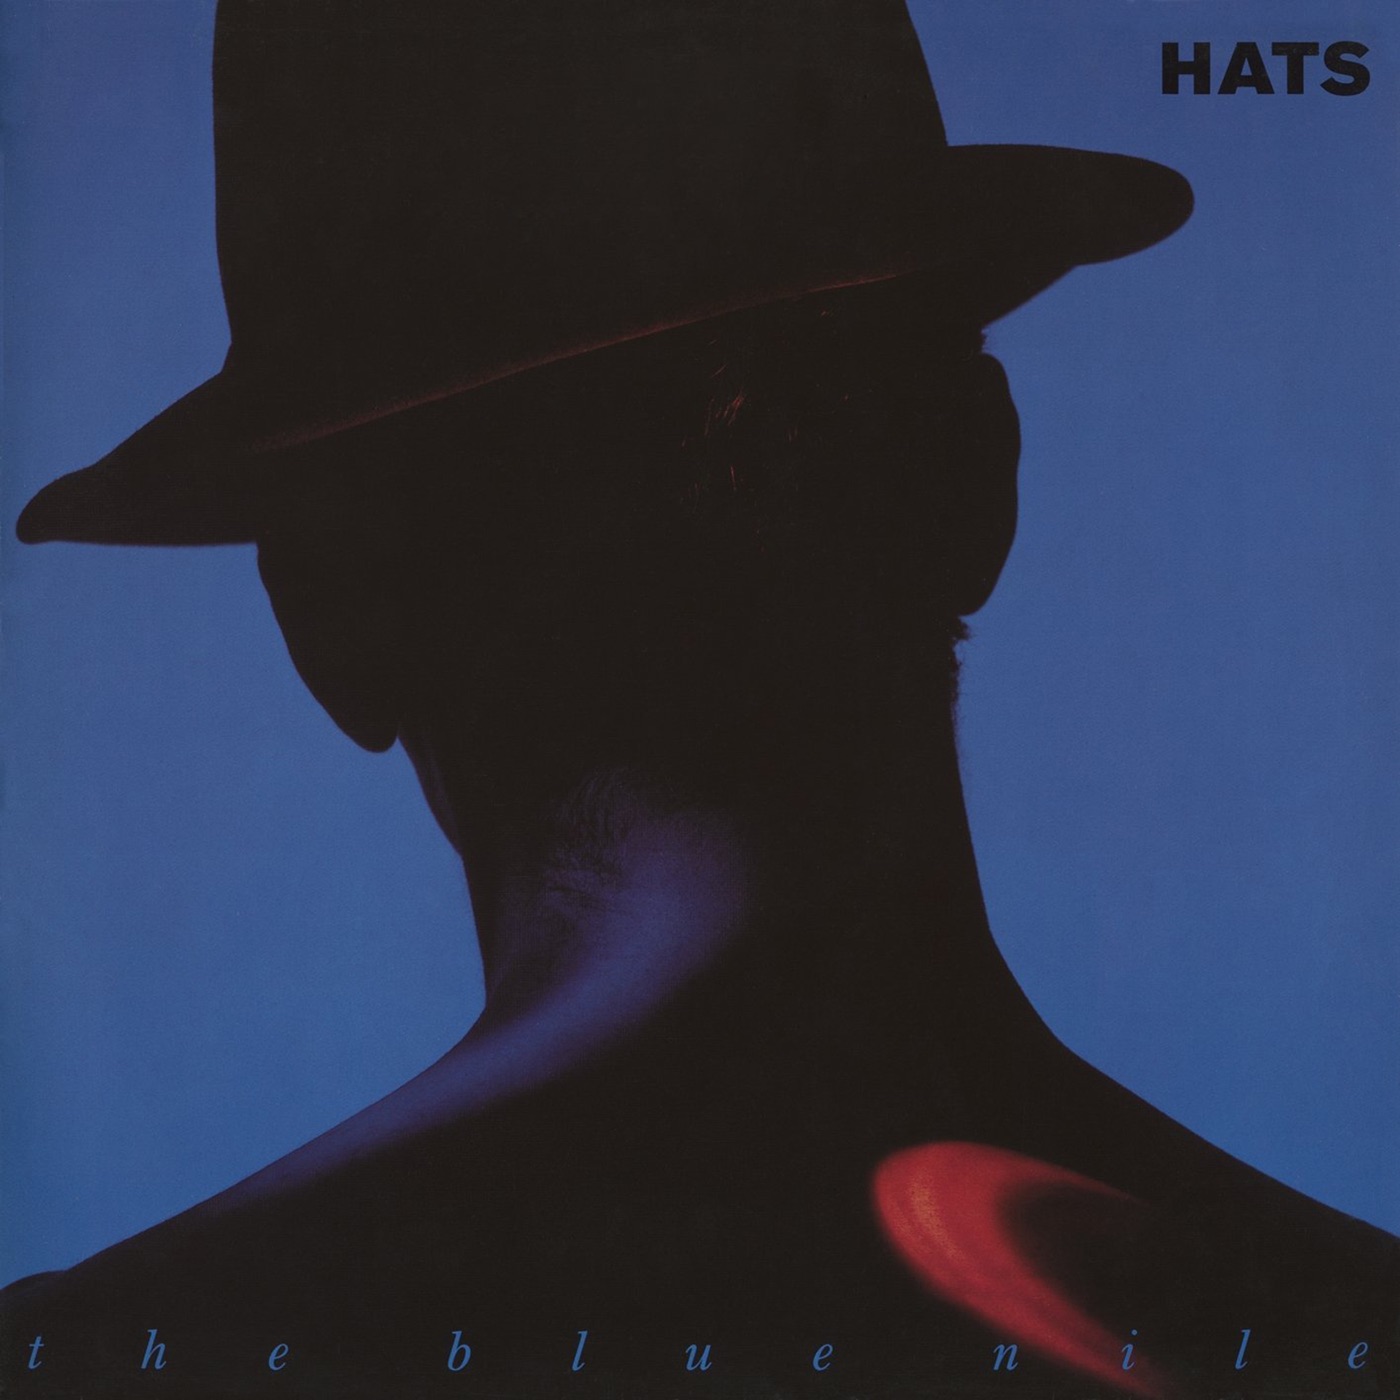 Hats by The Blue Nile